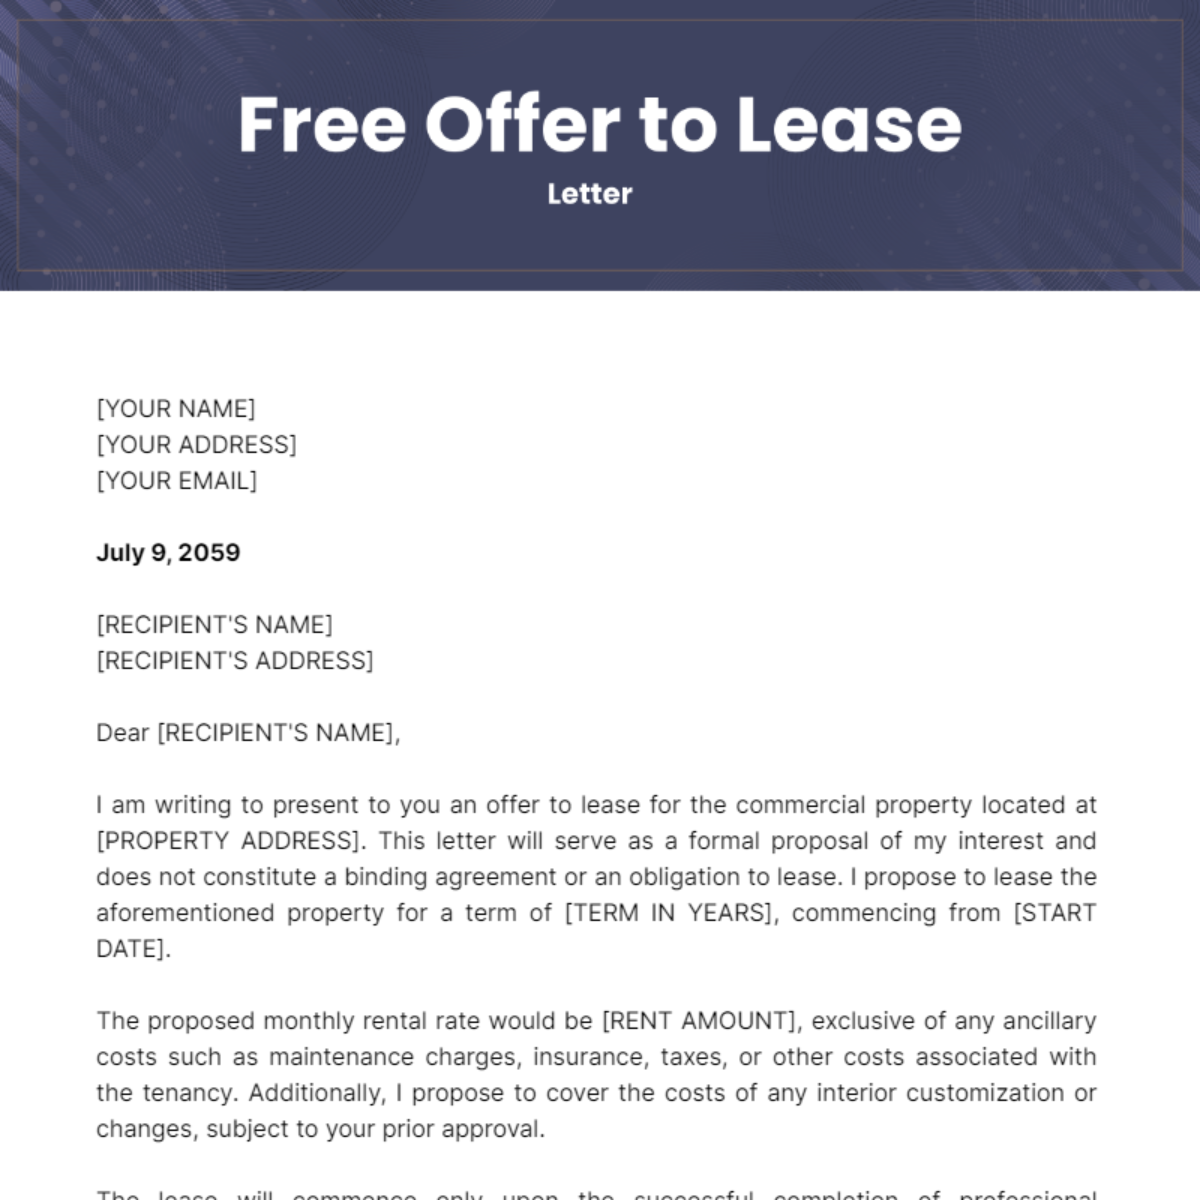 Offer to Lease Letter Template